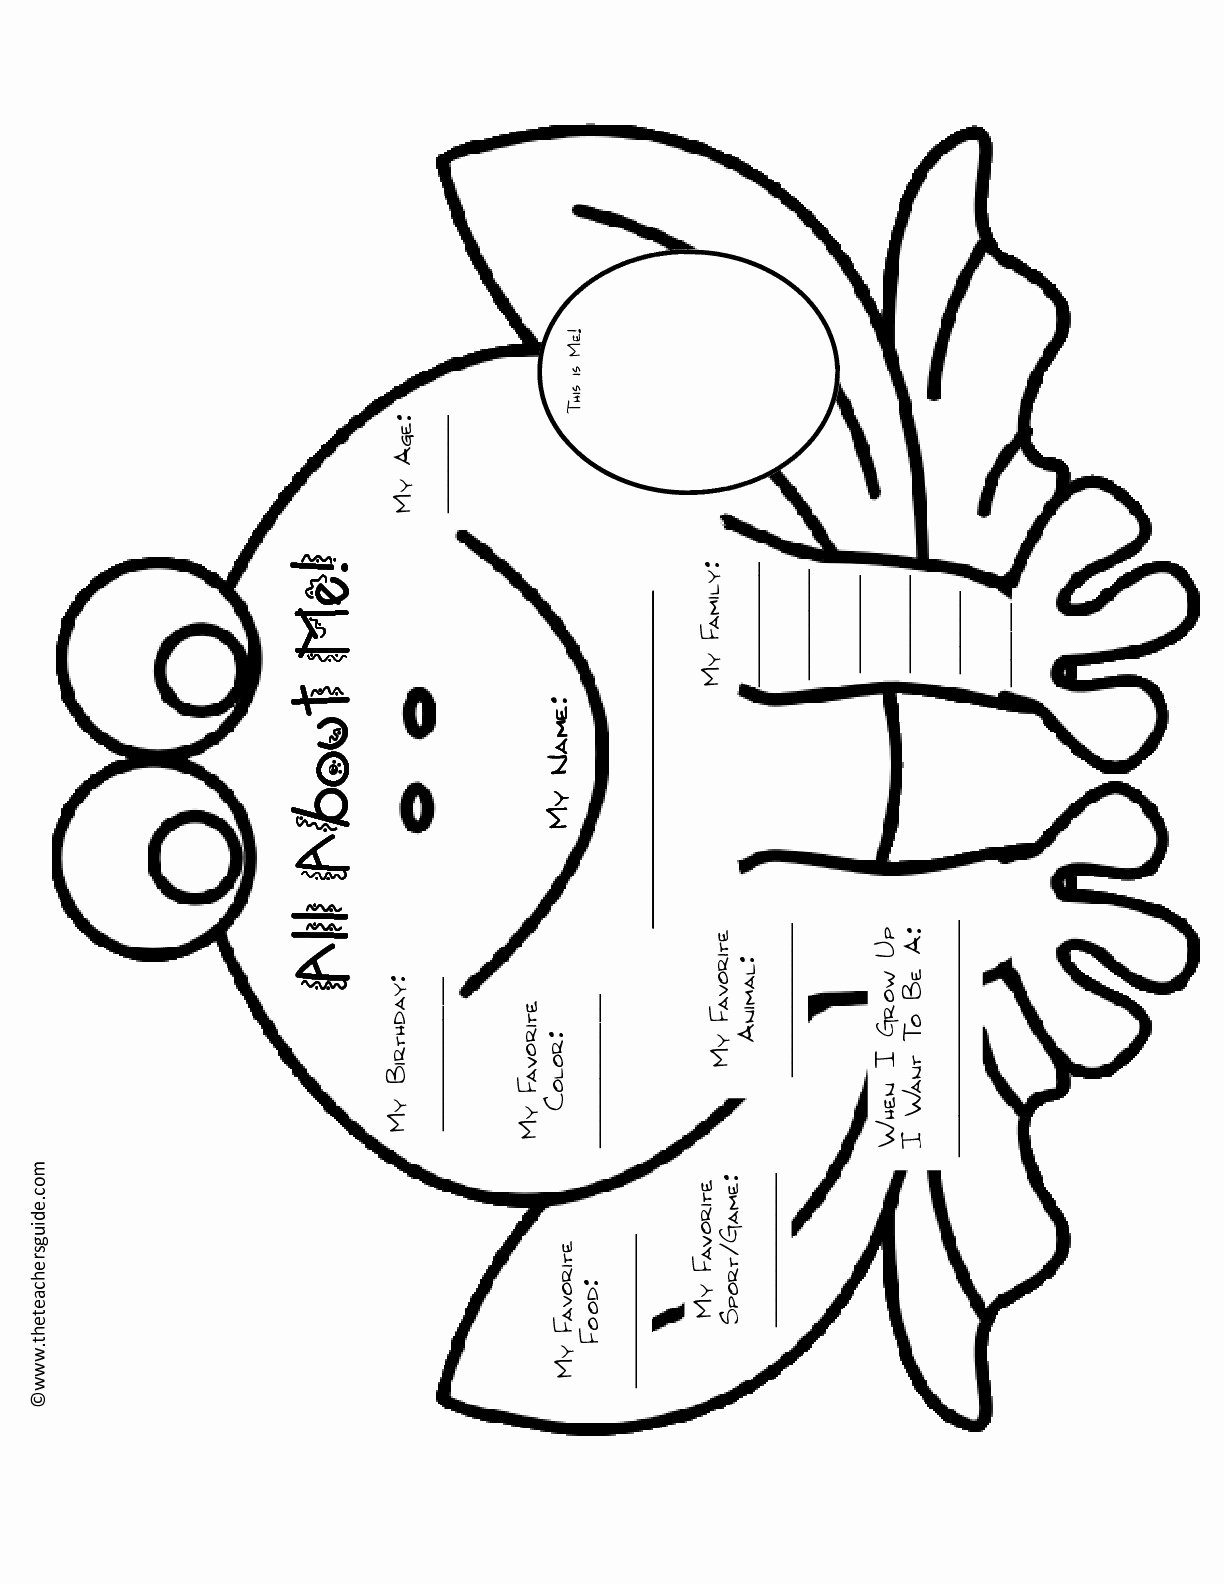 50 All About Me Worksheet Pdf